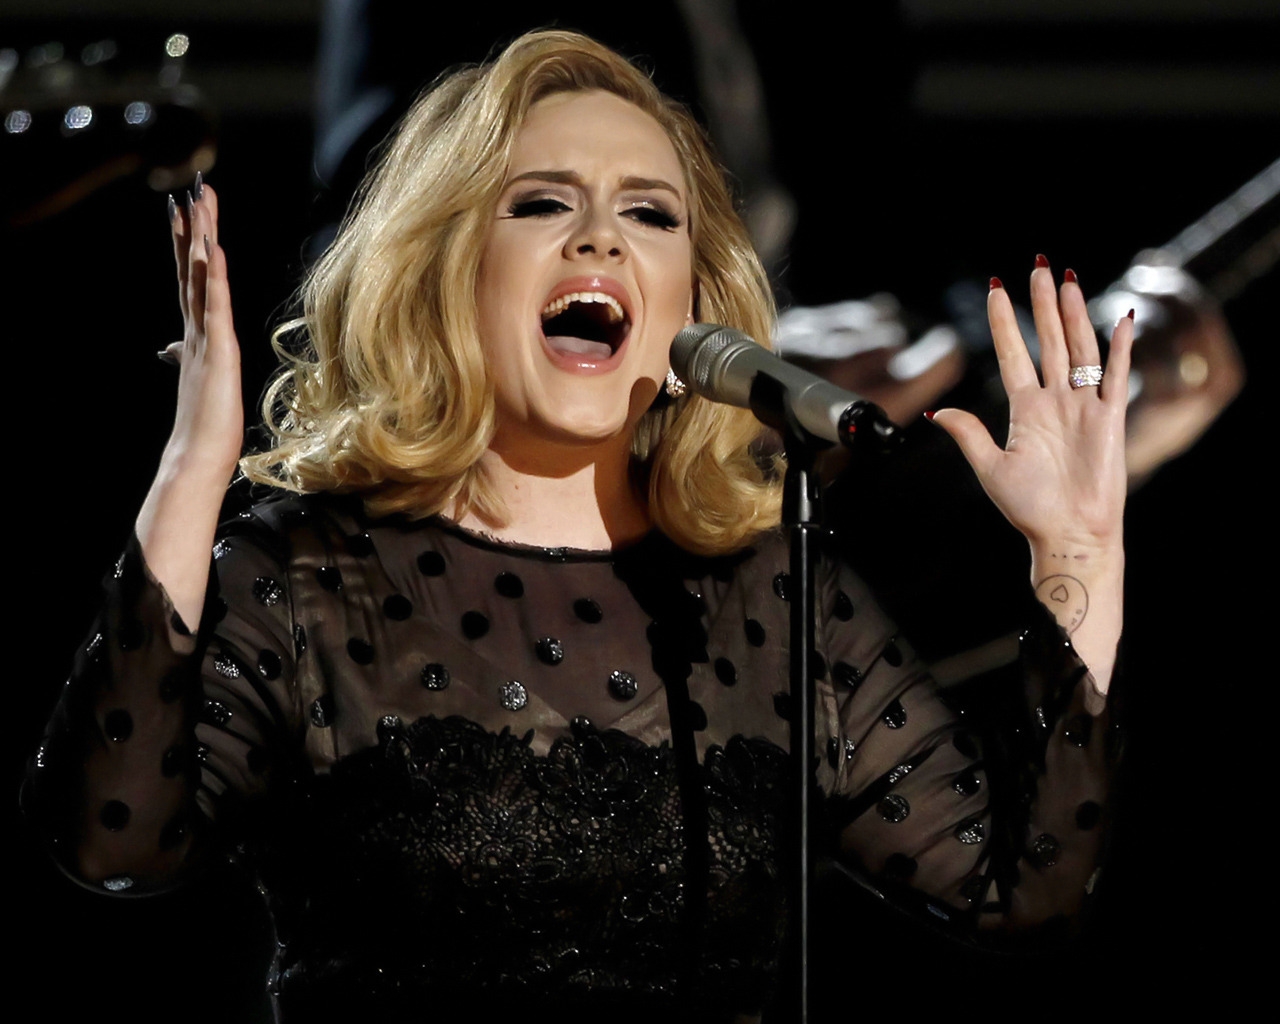 Adele Singing for 1280 x 1024 resolution